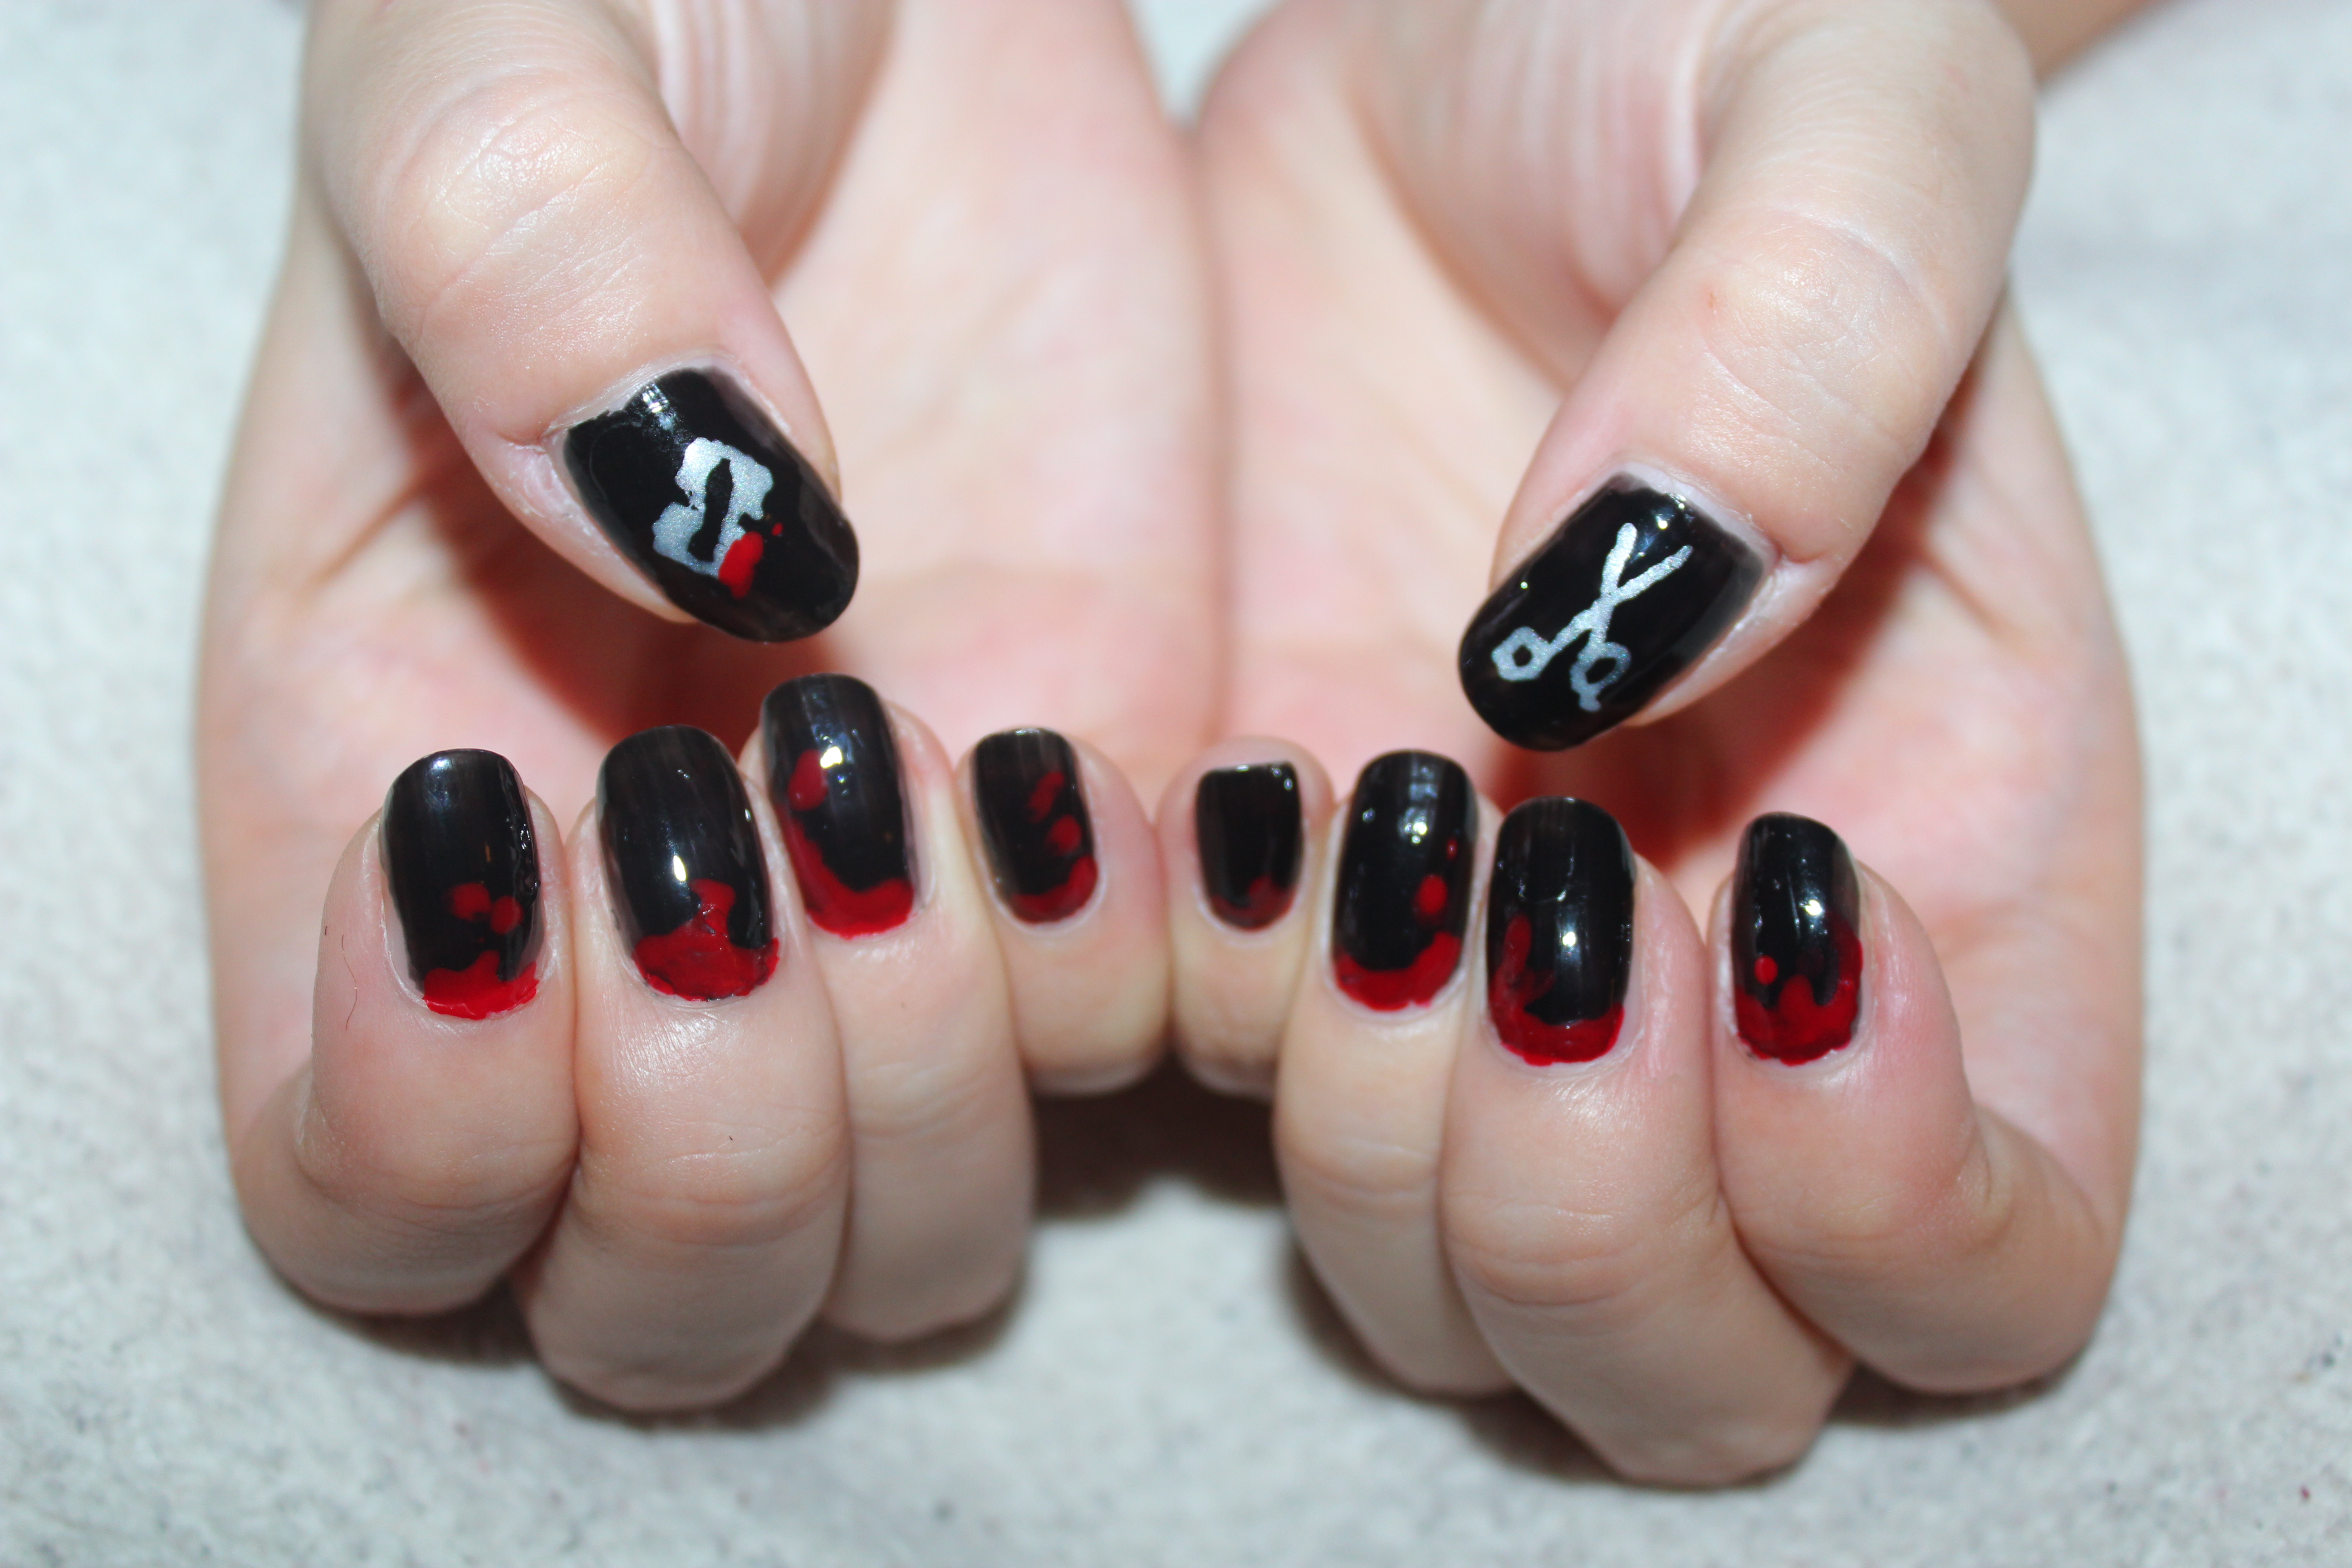 Sweeney Todd nails 2